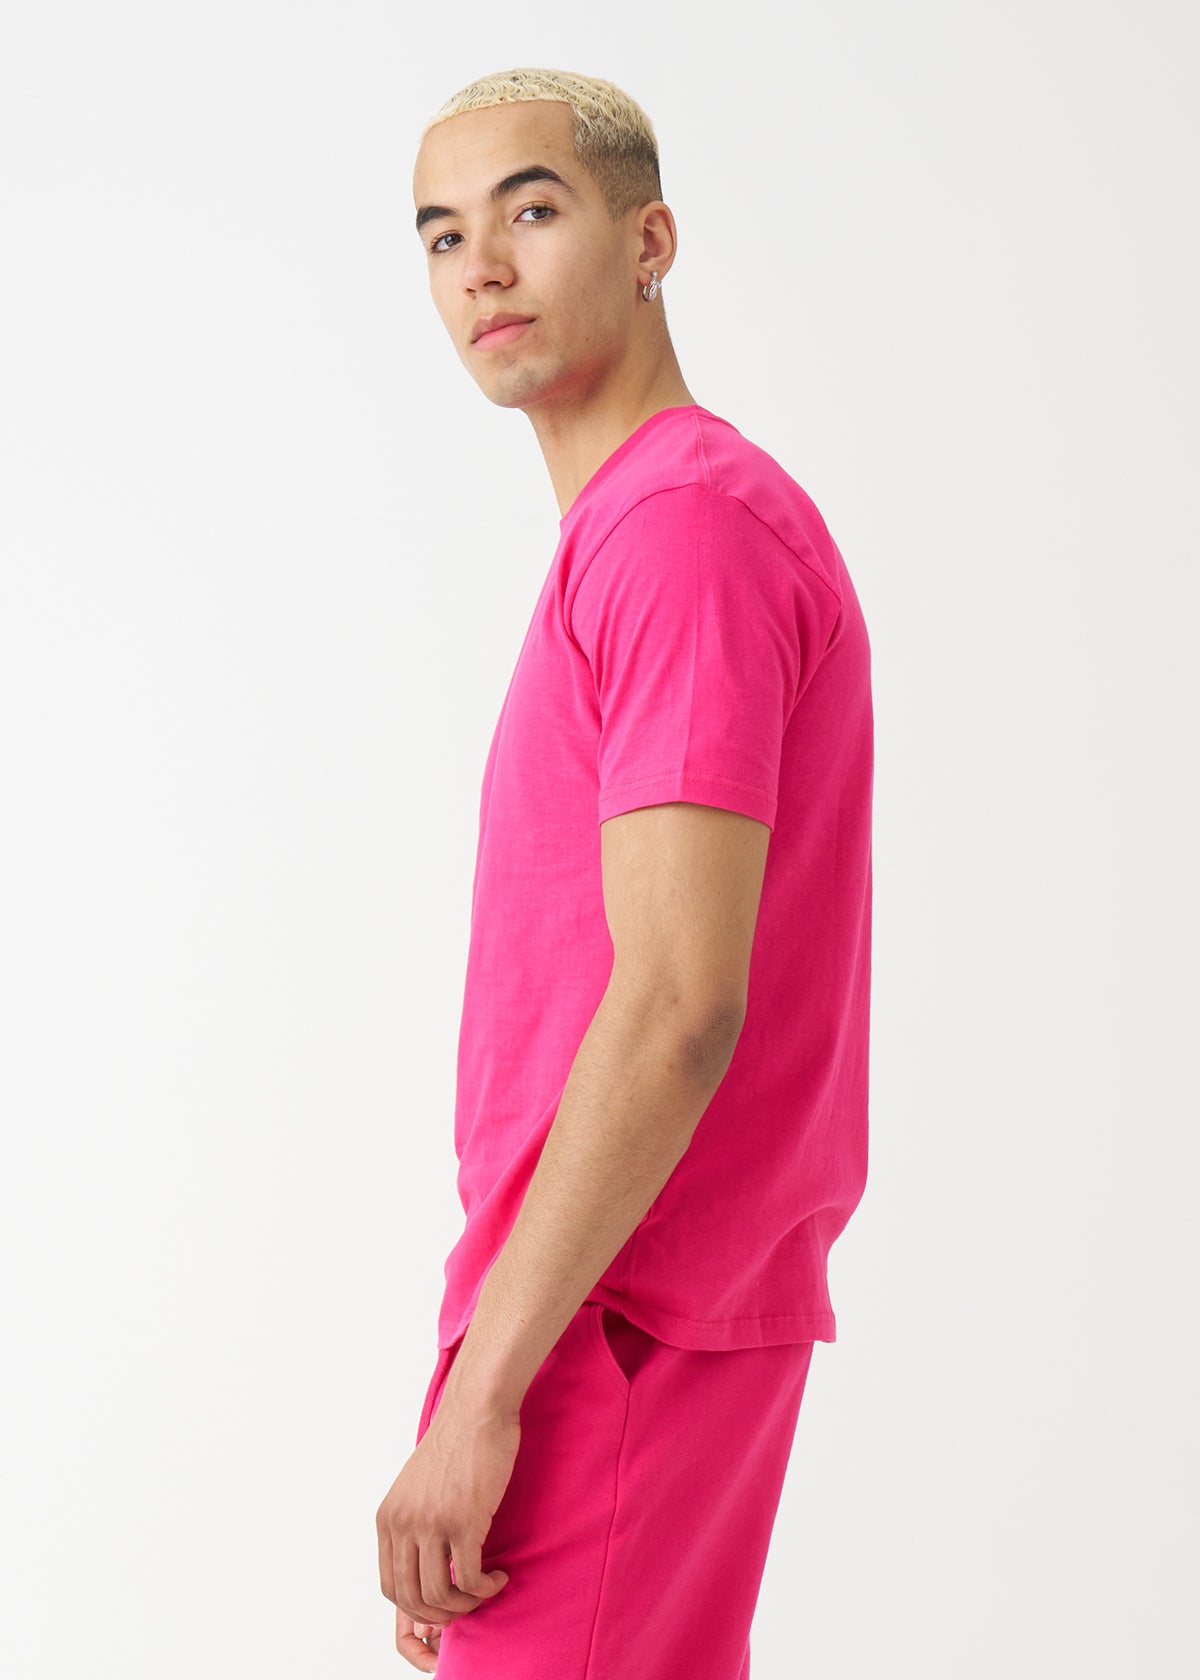 Hot Pink Combed Cotton T-Shirt